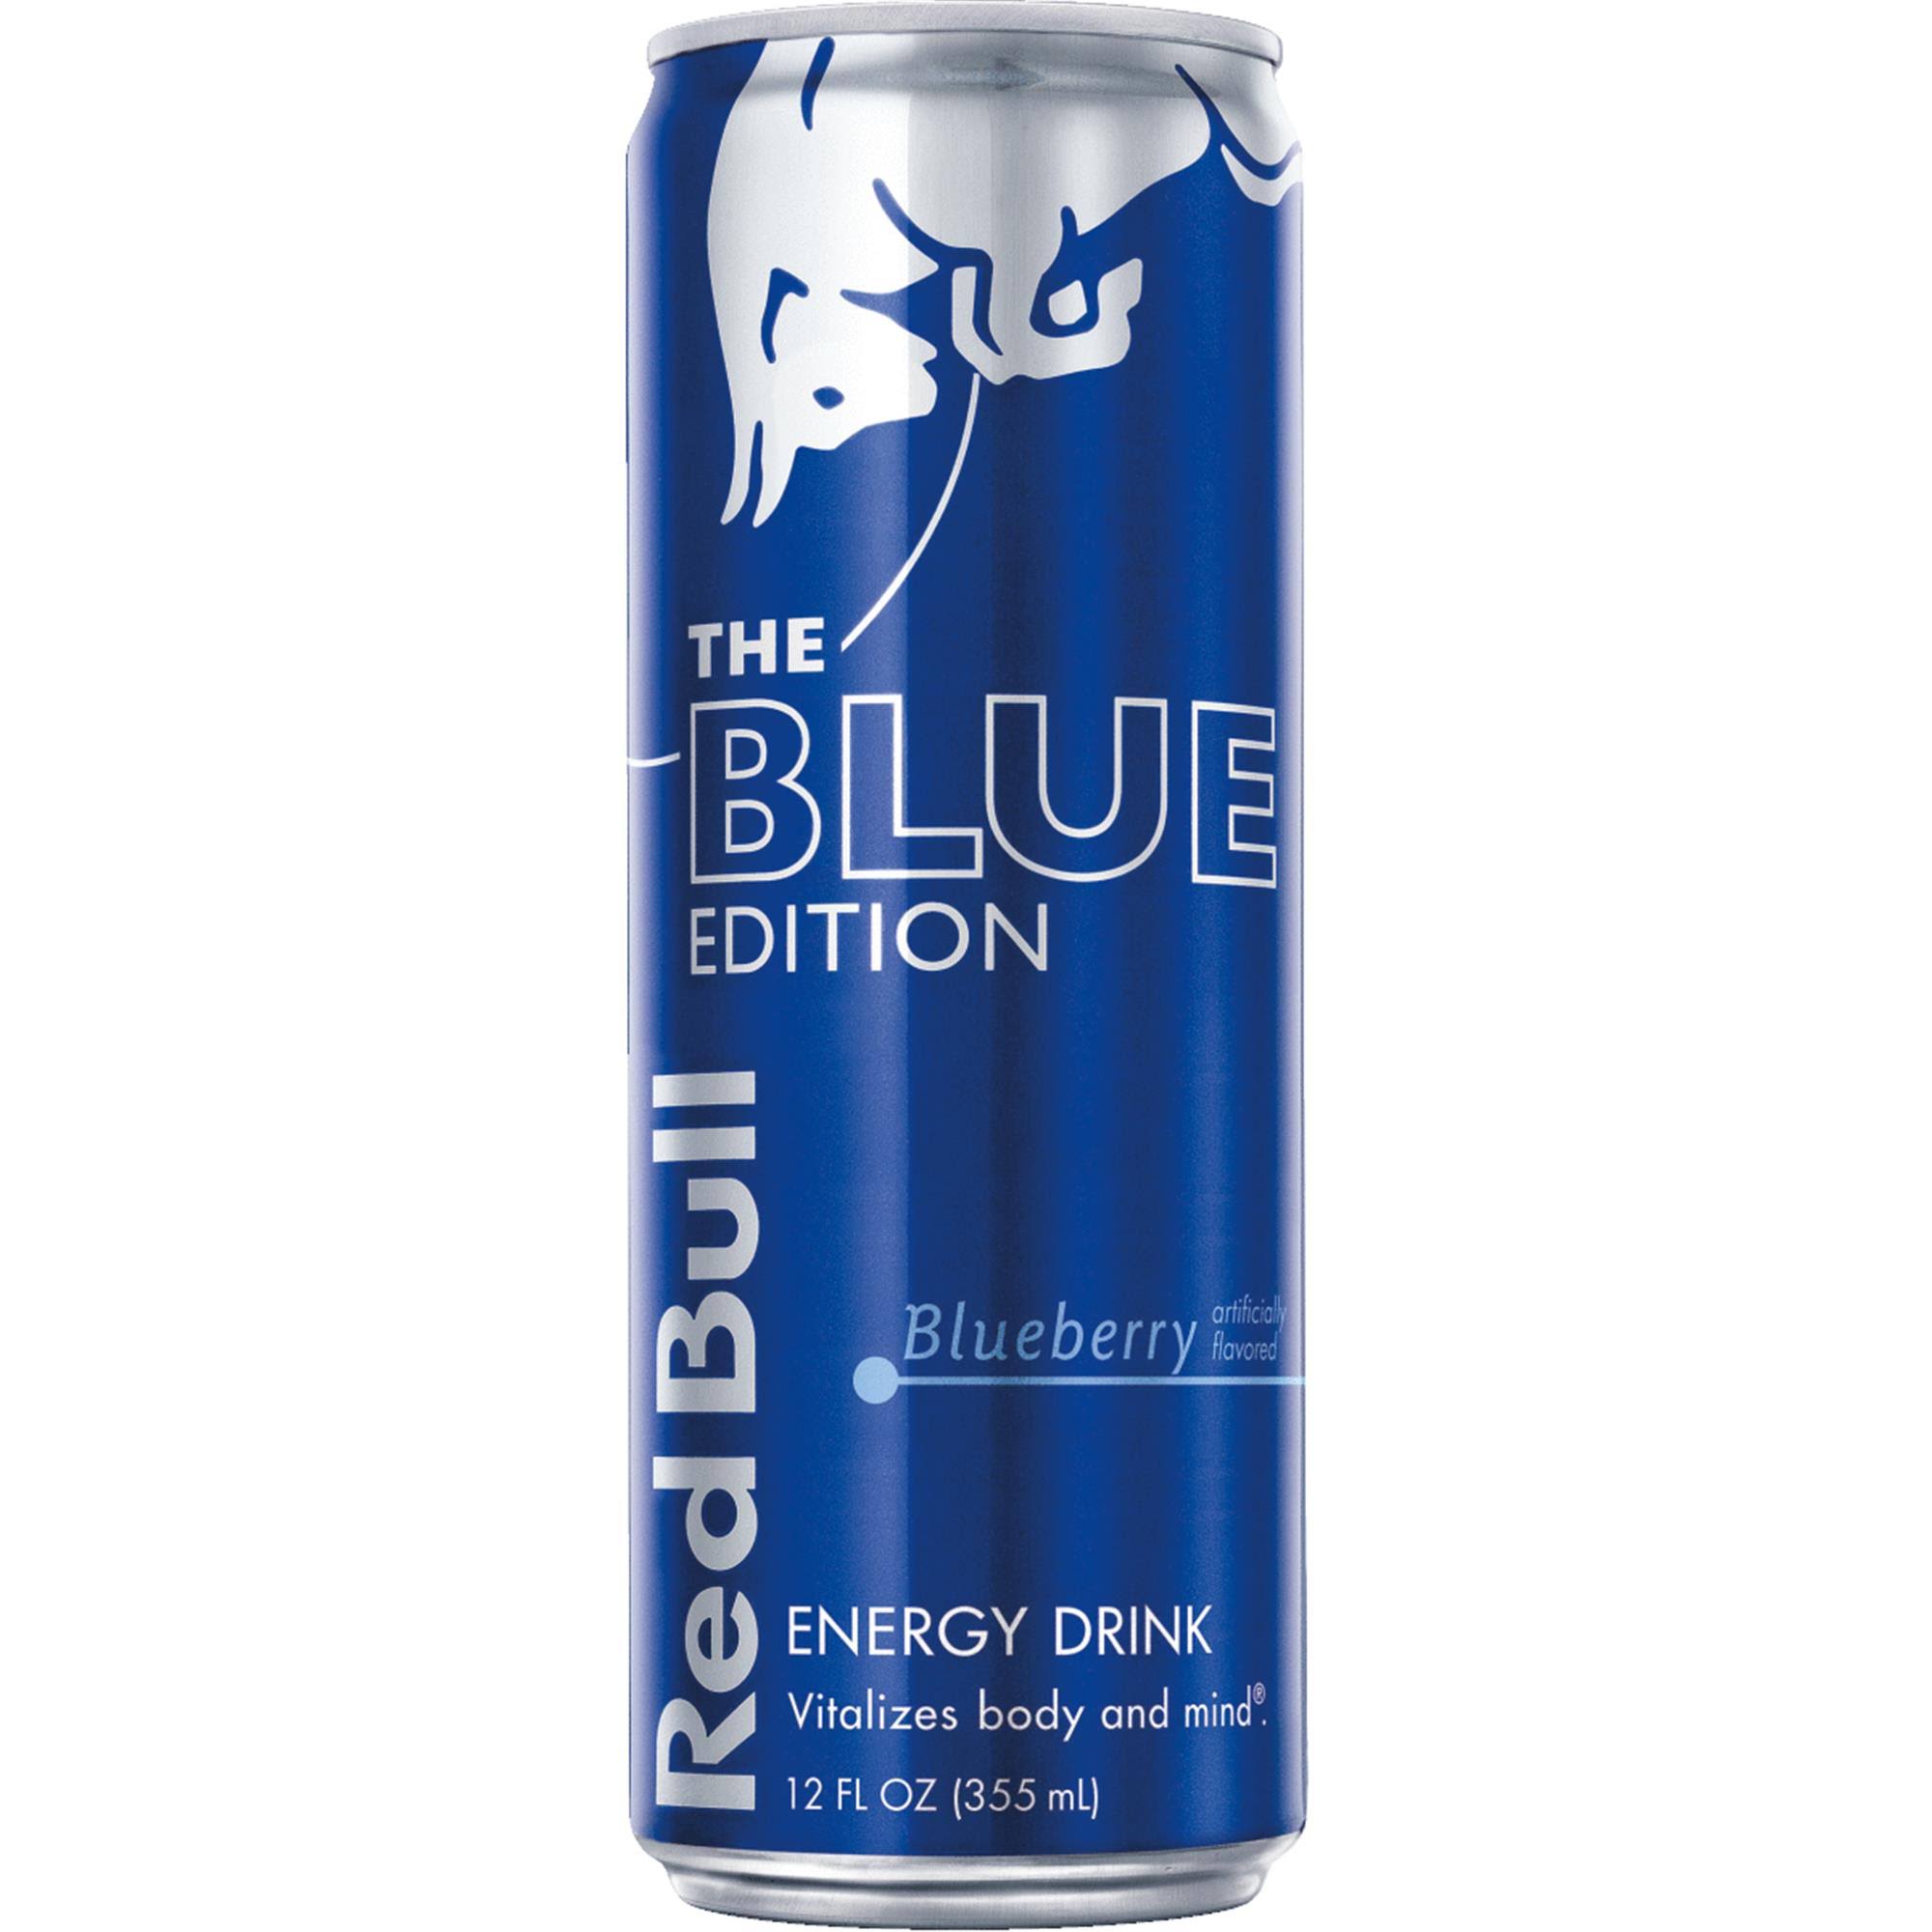 Red Bull The Blue Edition Energy Drink - Blueberry, 355ml